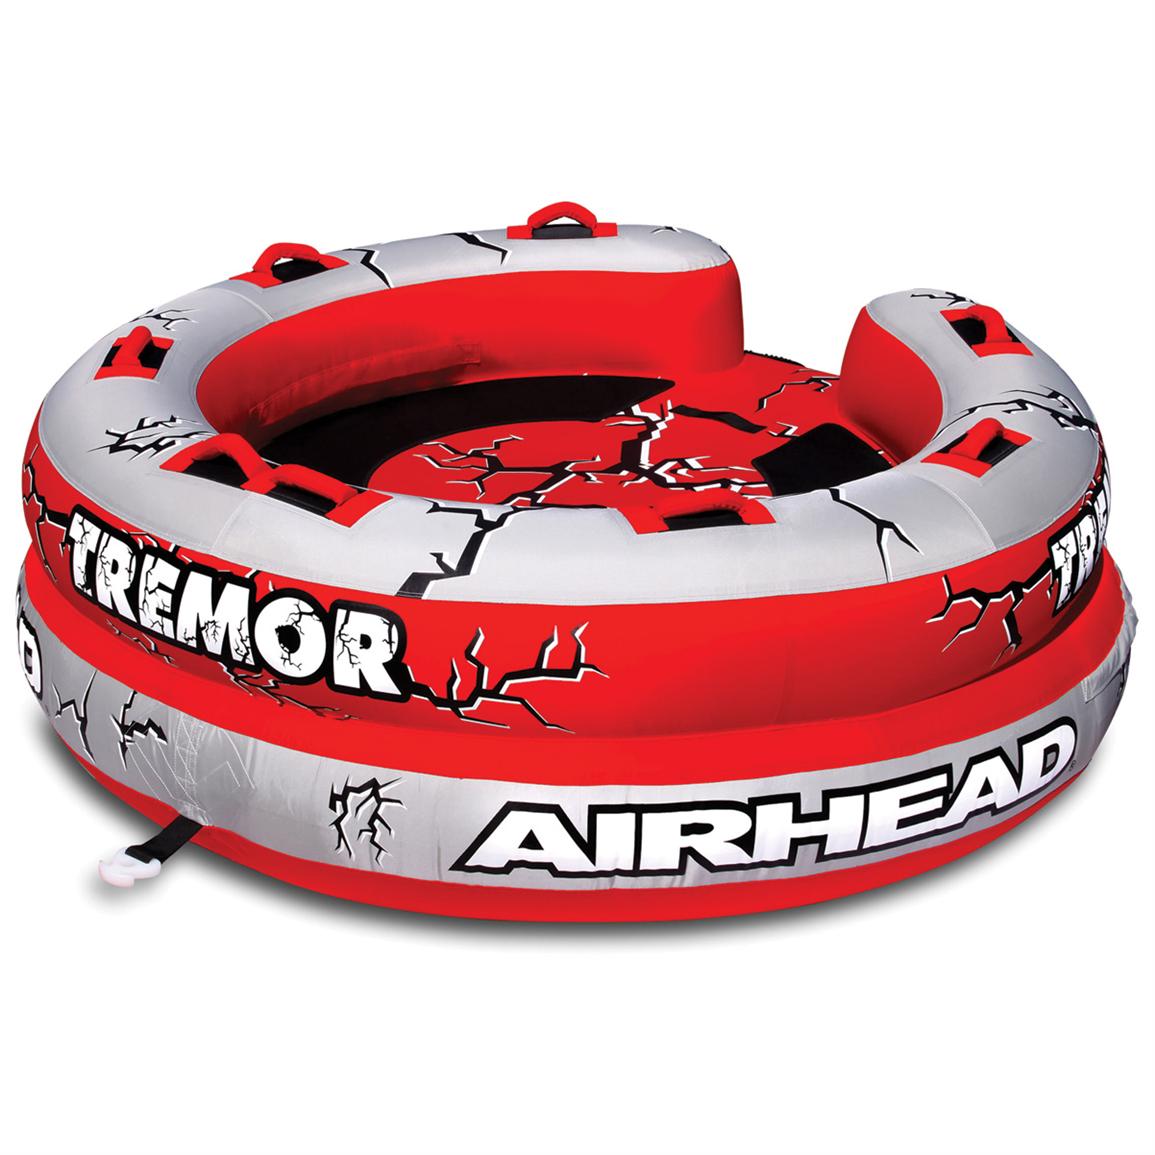 Airhead® Tremor 4rider Towable Tube 296401, Tubes & Towables at